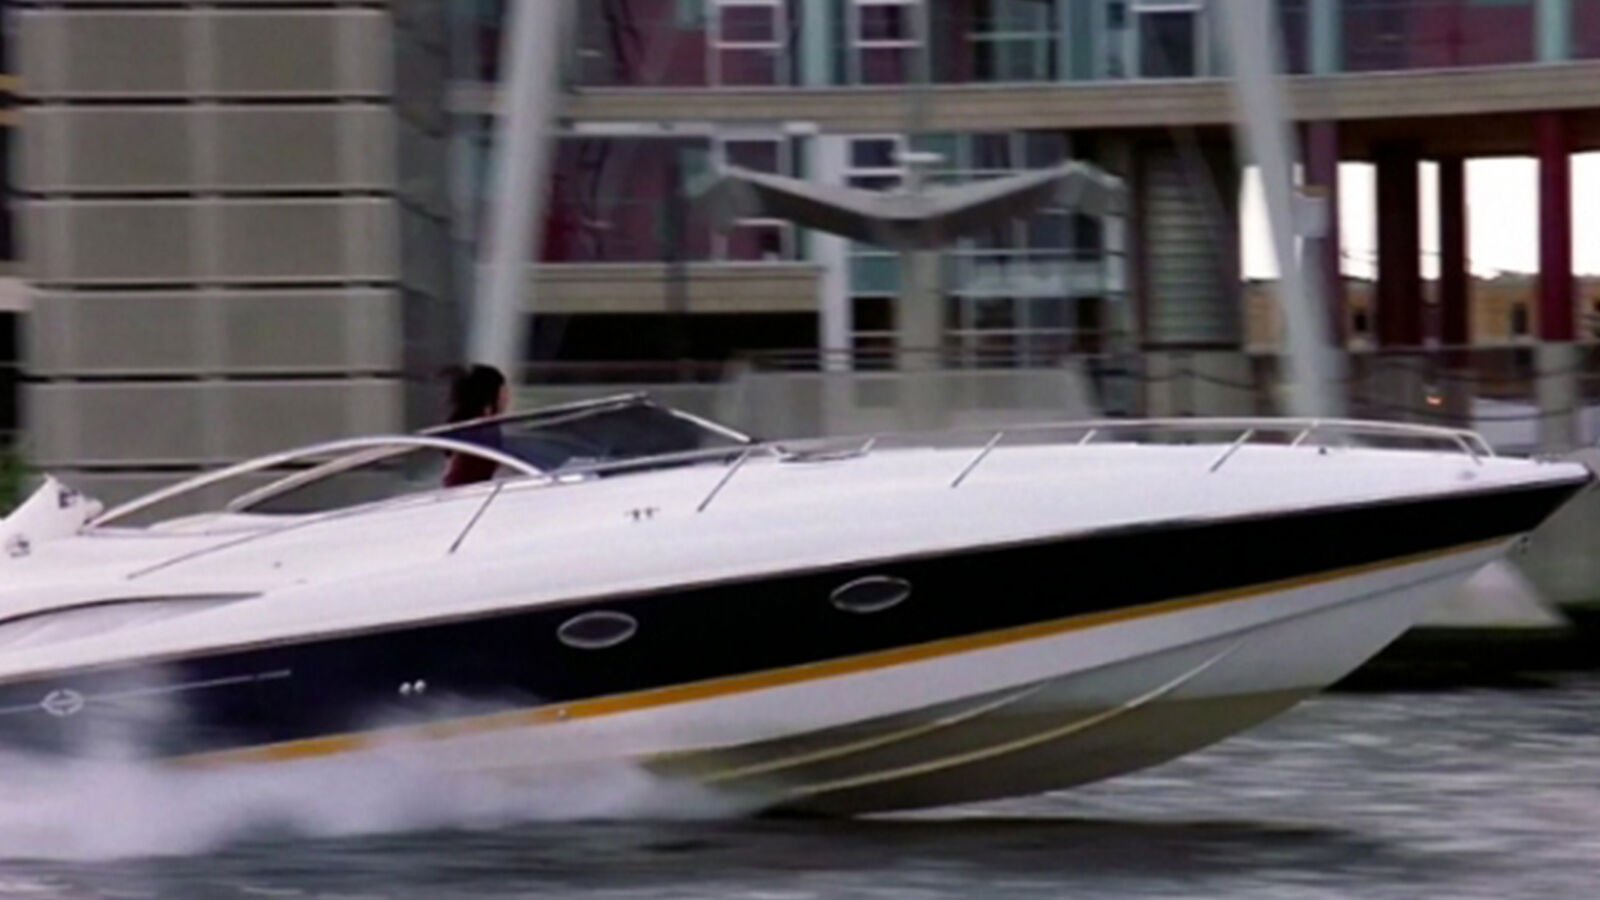 Sunseeker Superhawk 34 – The World Is Not Enough (1999)